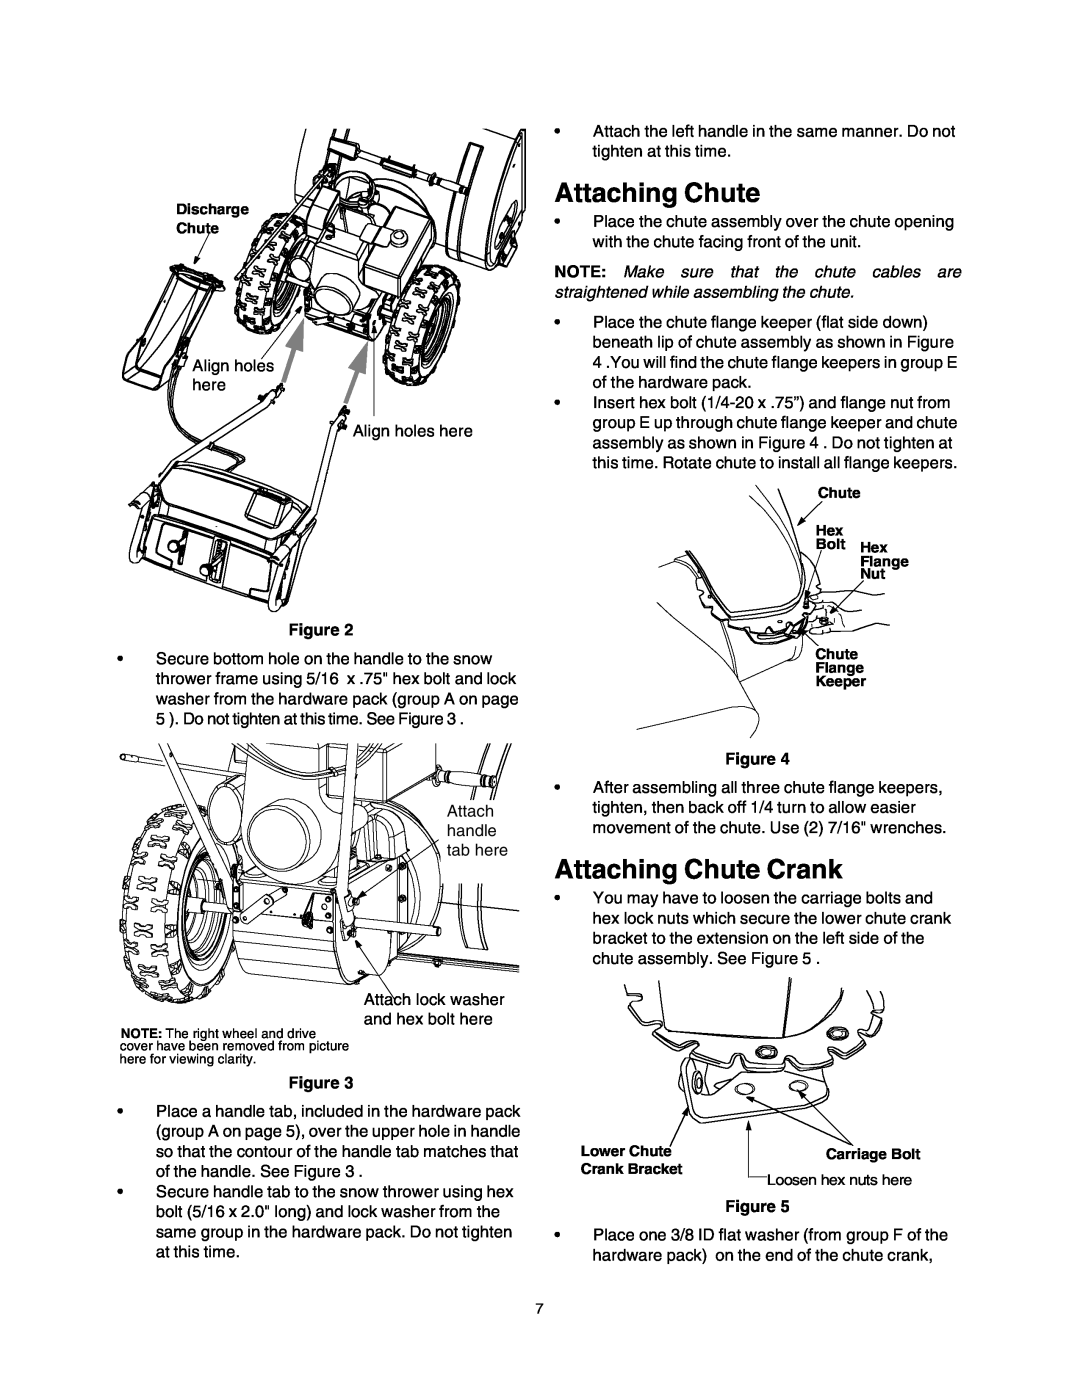 Sears 247.88853 owner manual Attaching Chute Crank 